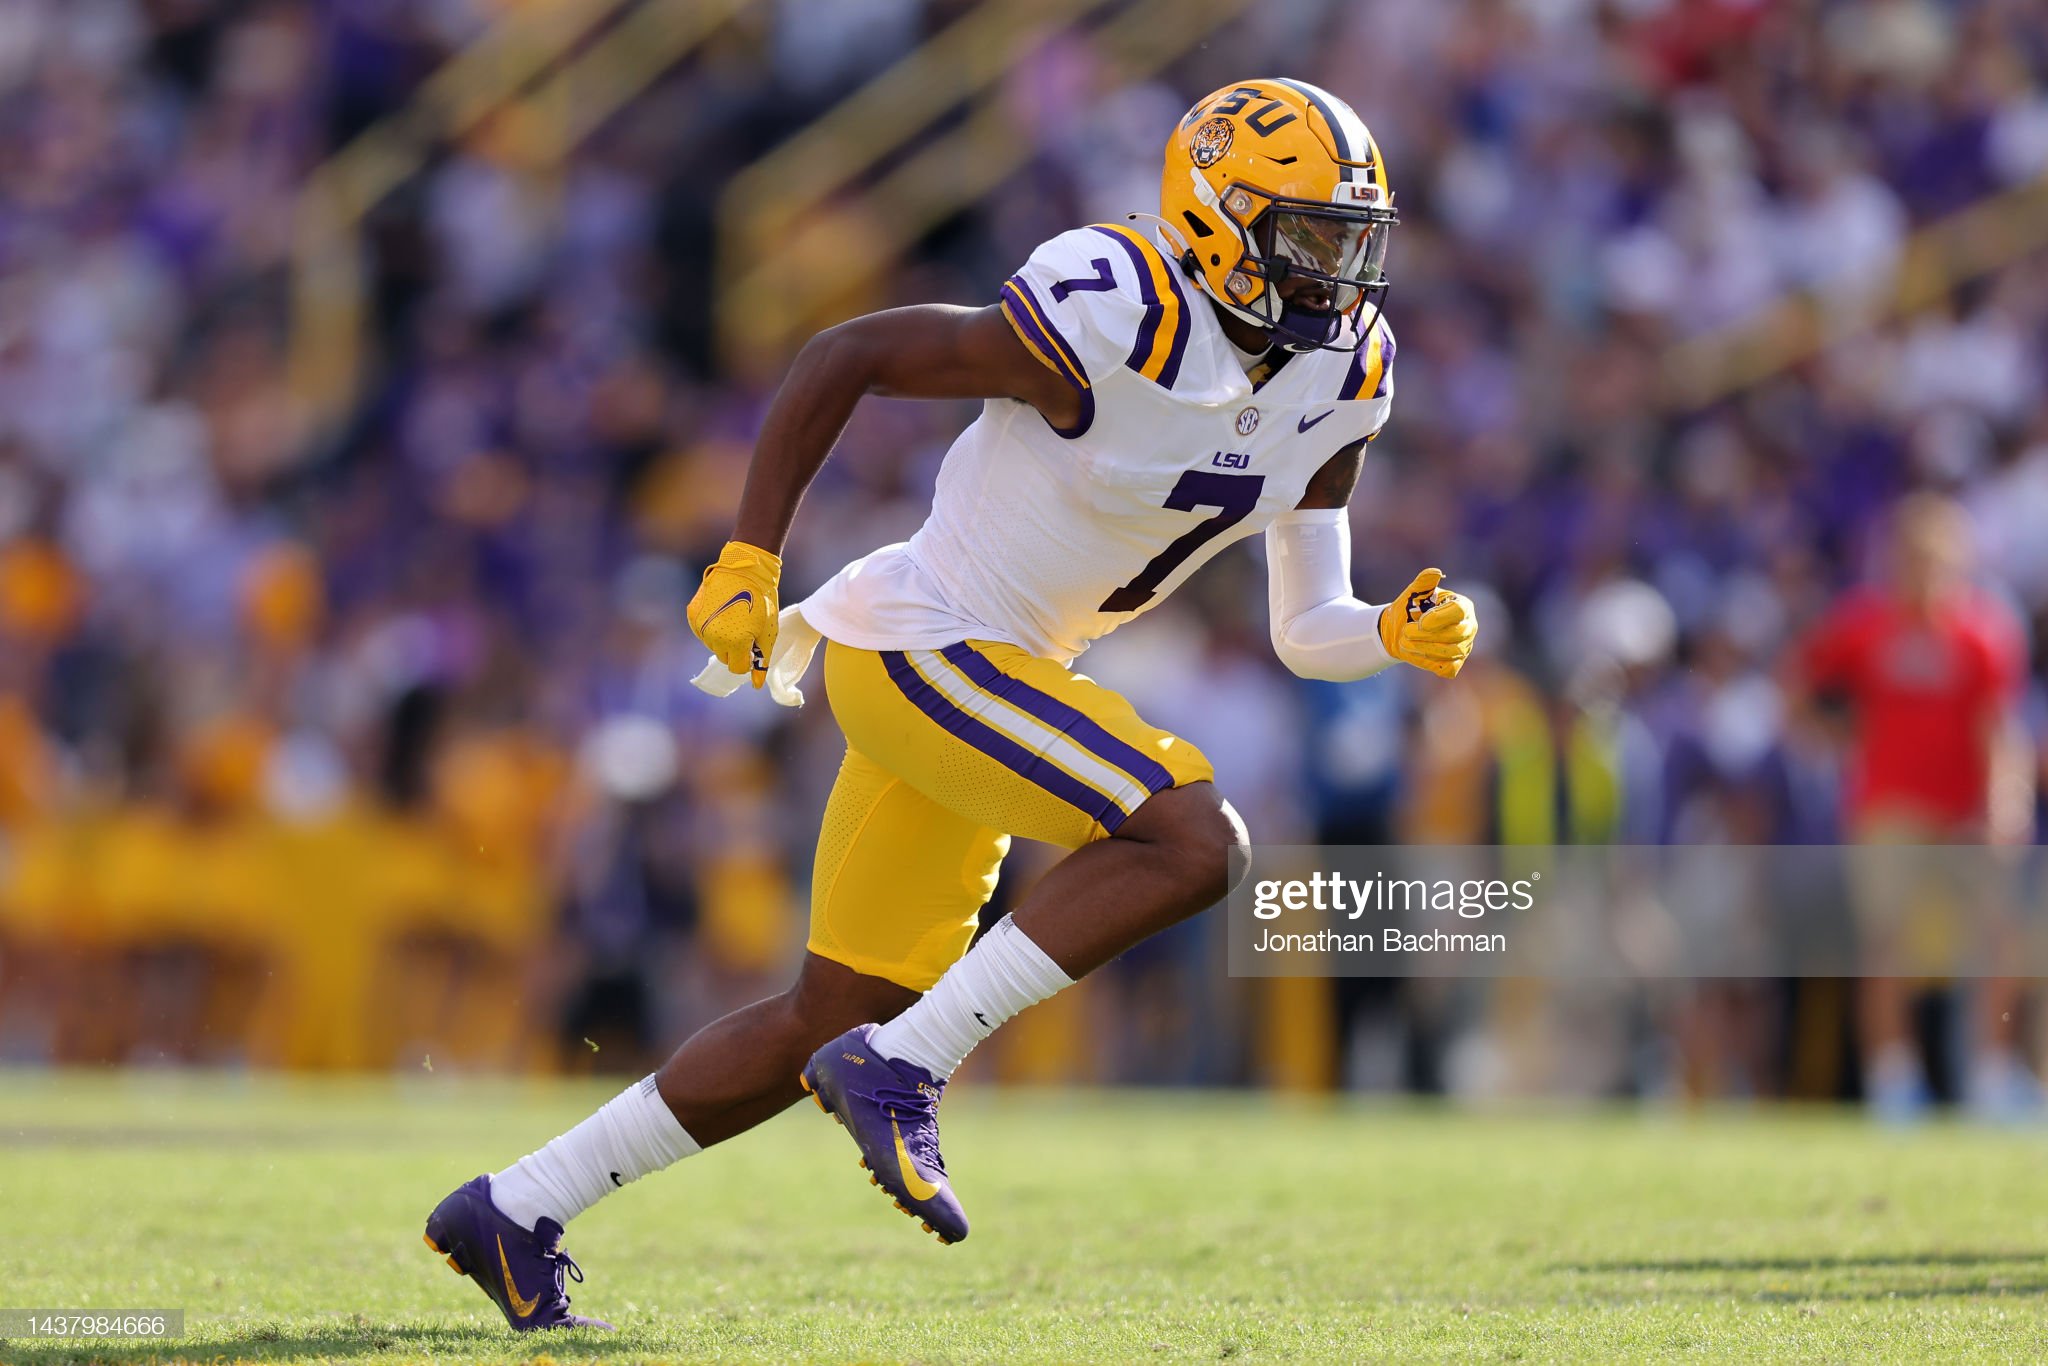 2023 NFL Draft Scouting Report: WR Kayshon Boutte, LSU